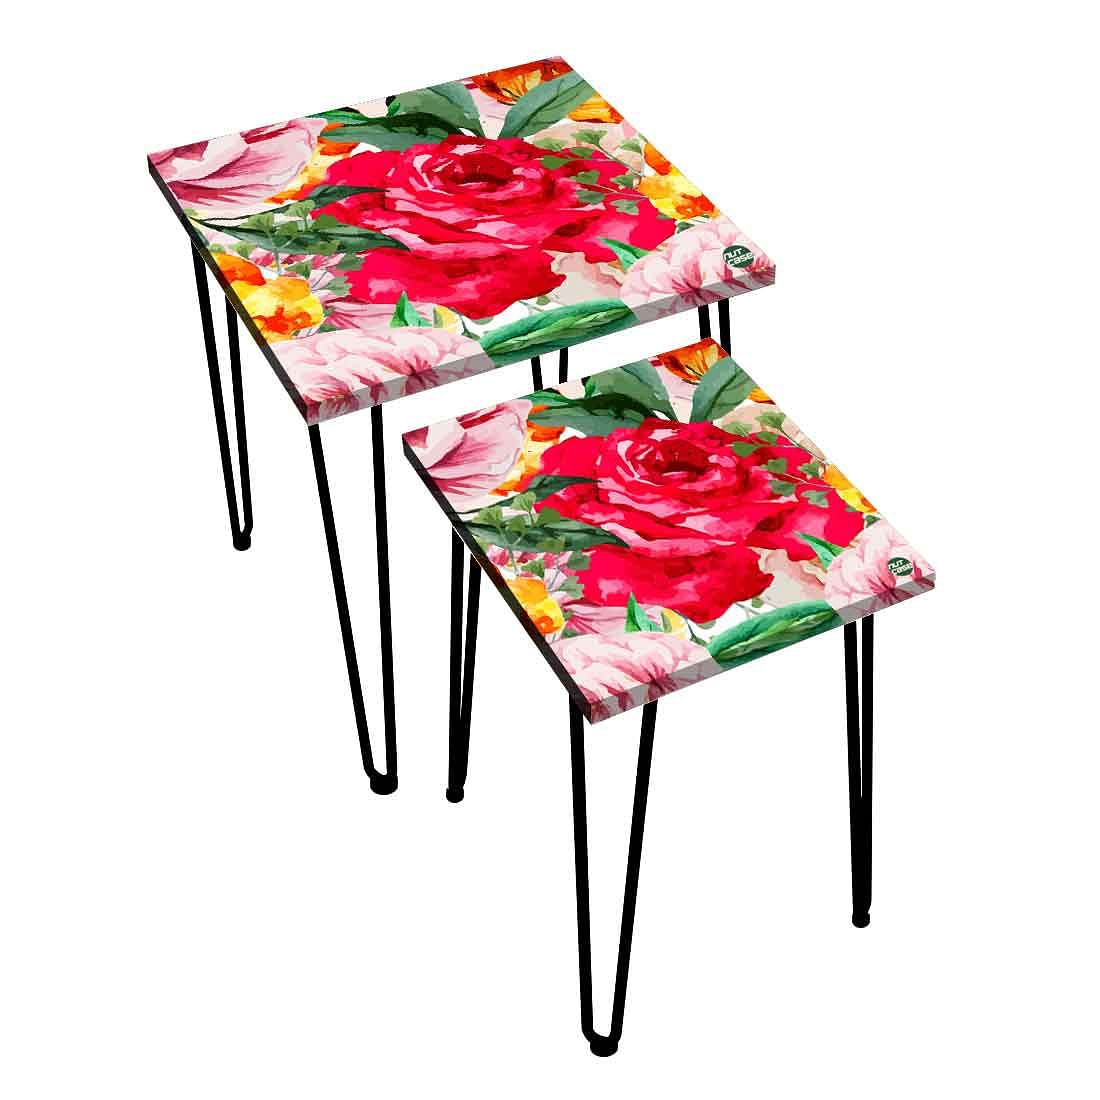 Set of 2 Square Nesting Tables for Home Office and Outdoor - Red Floral Nutcase